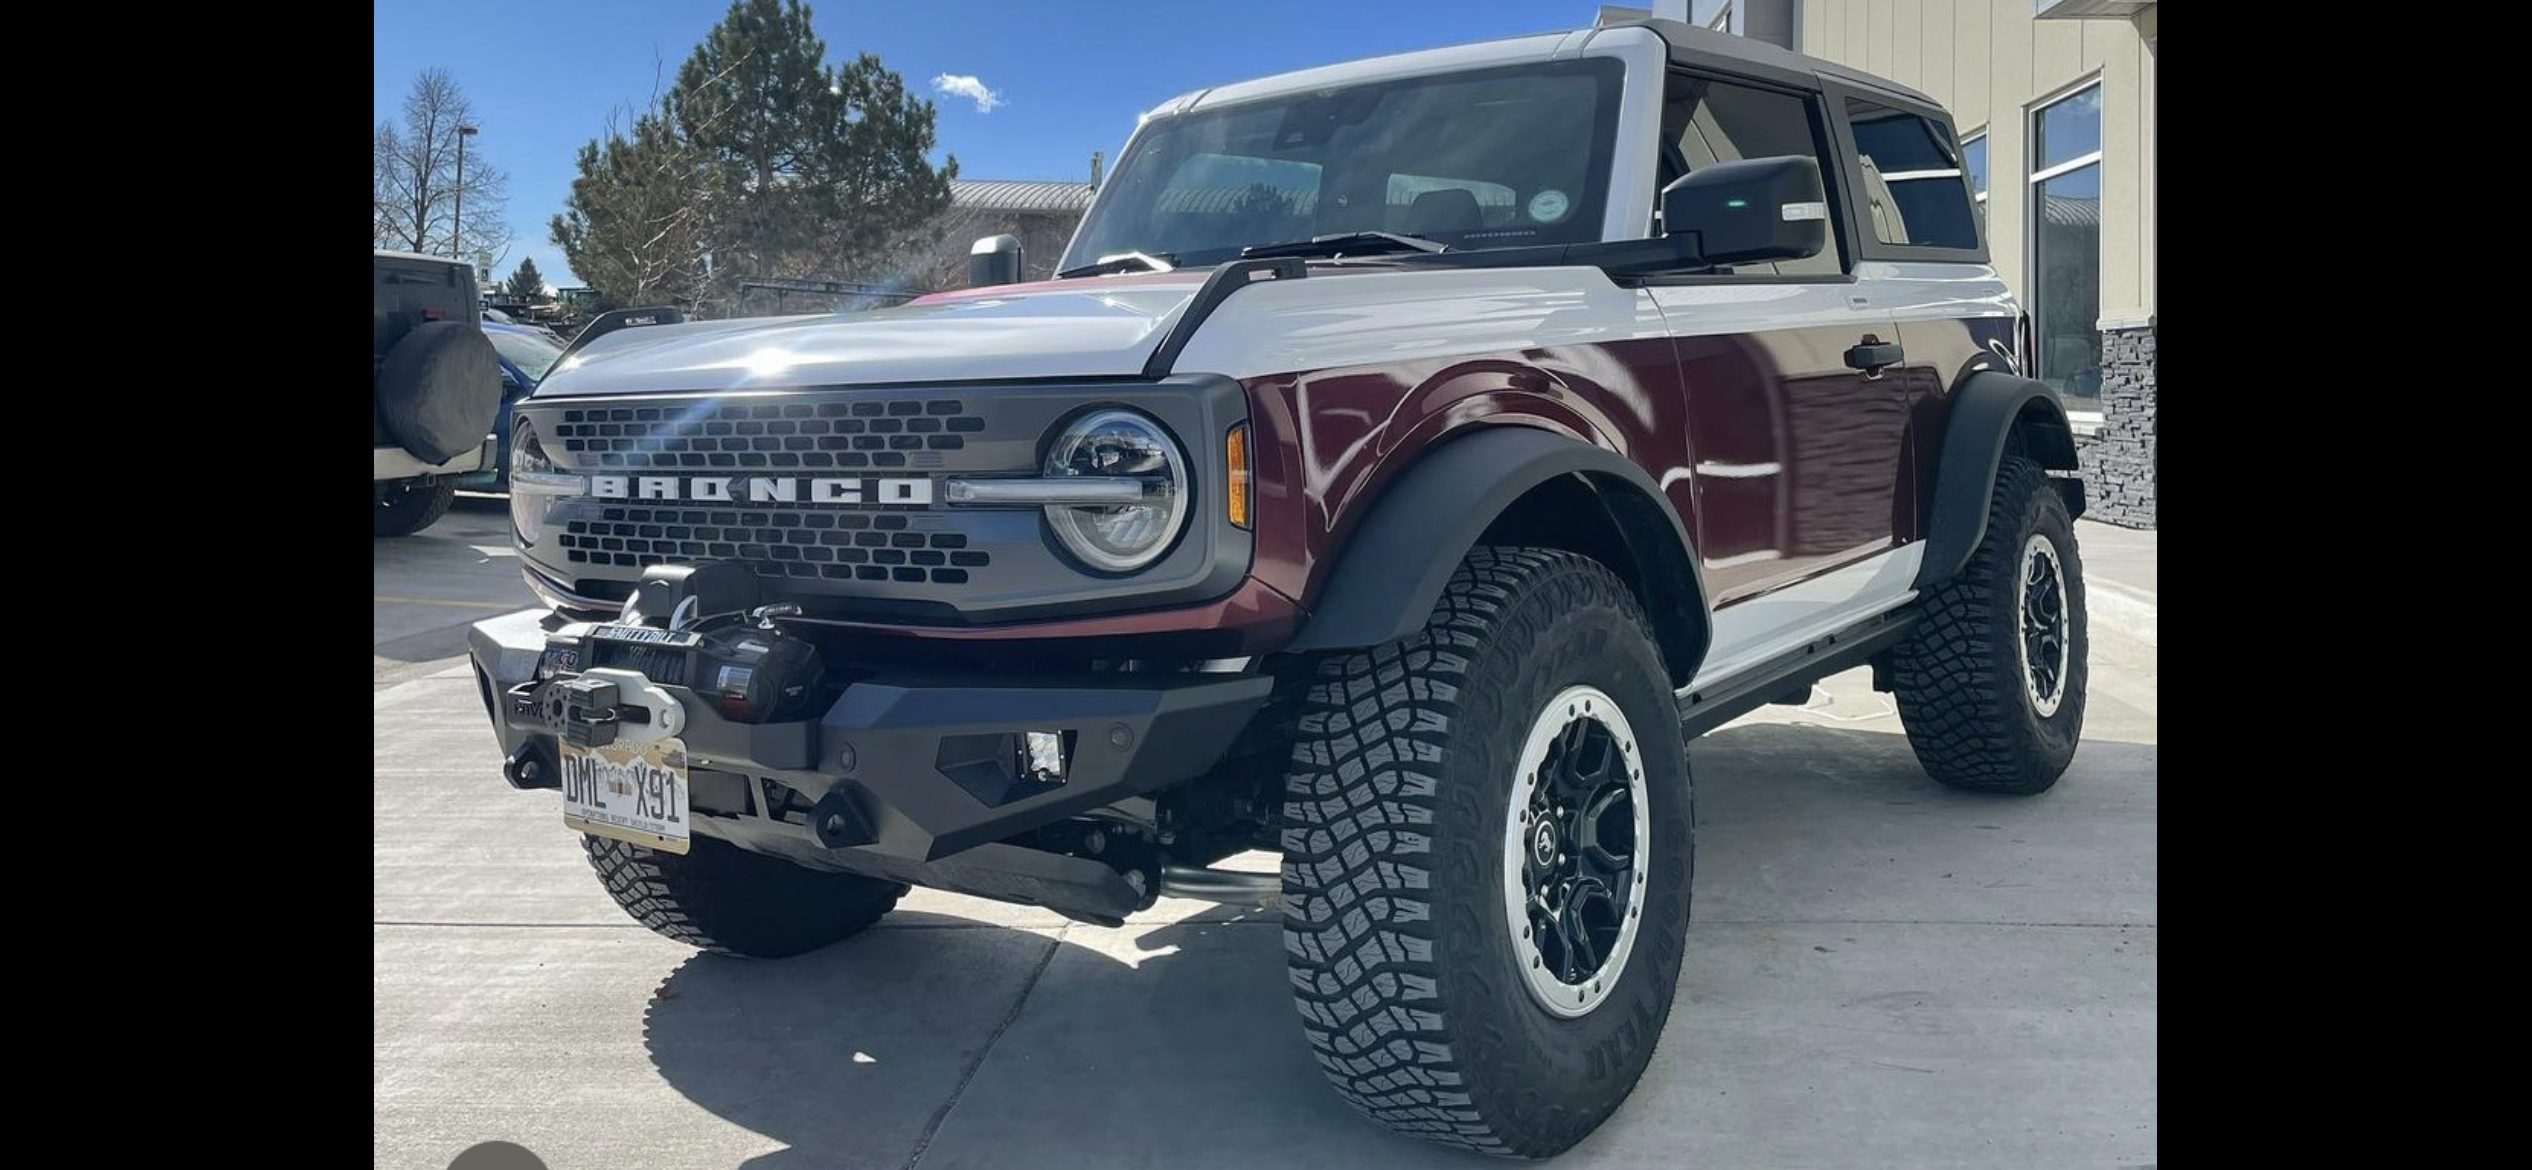 Ford Bronco OXFORD WHITE THREAD!!!! if you’re choosing Oxford White lemme know. I think it’s the best color available at the moment. Bronco wra